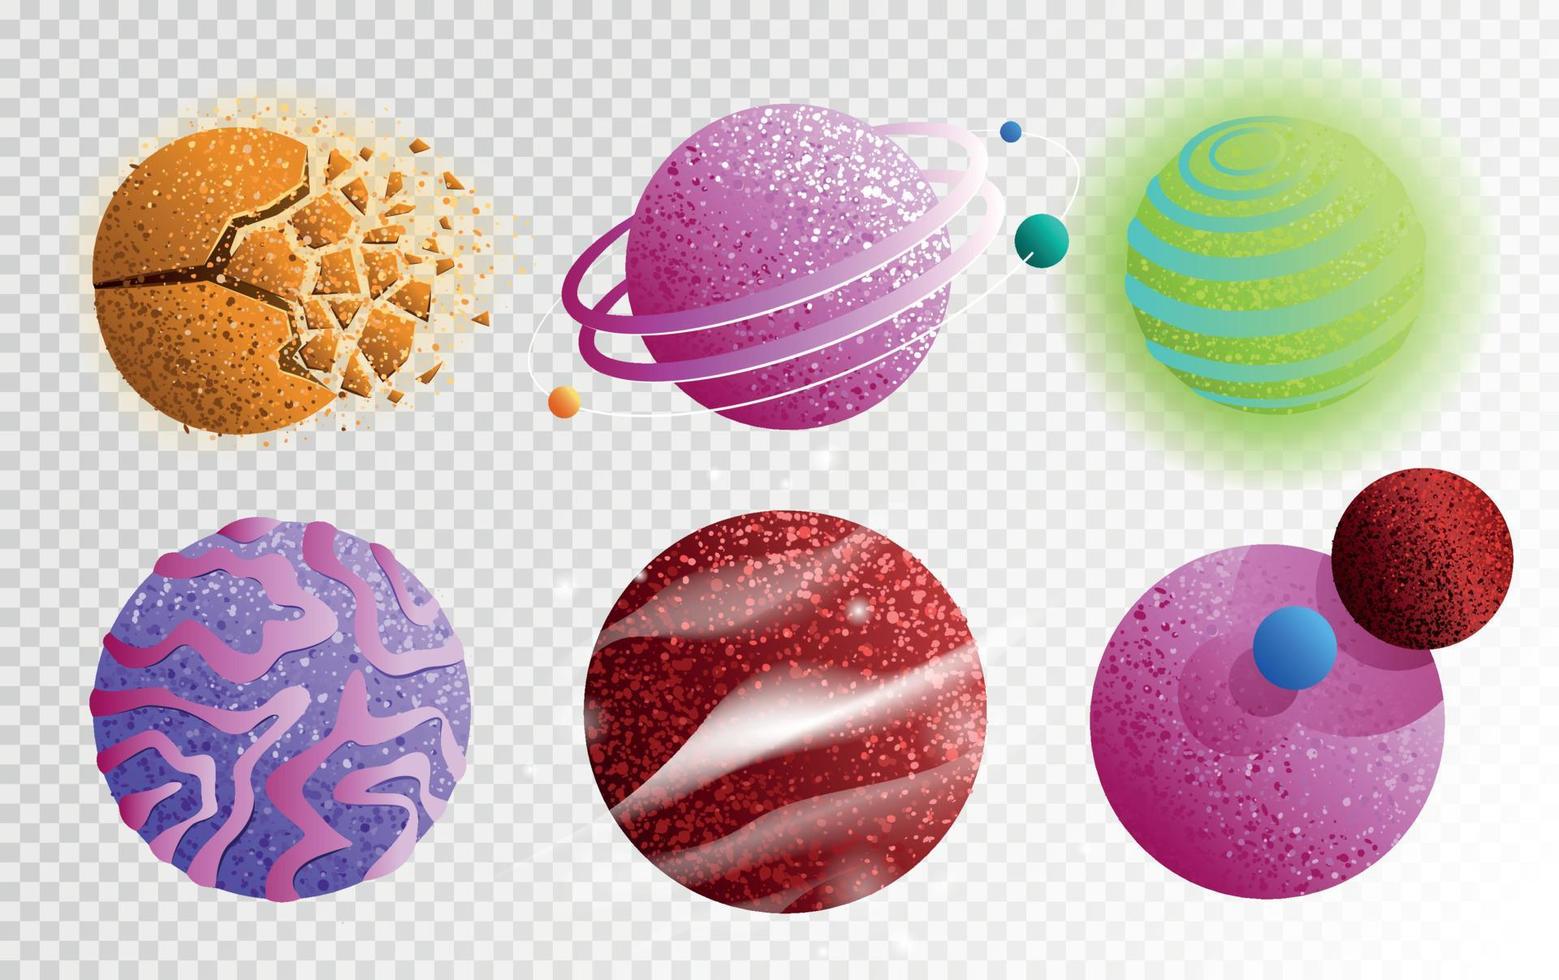 Set of Fantasy Glowing Planets vector